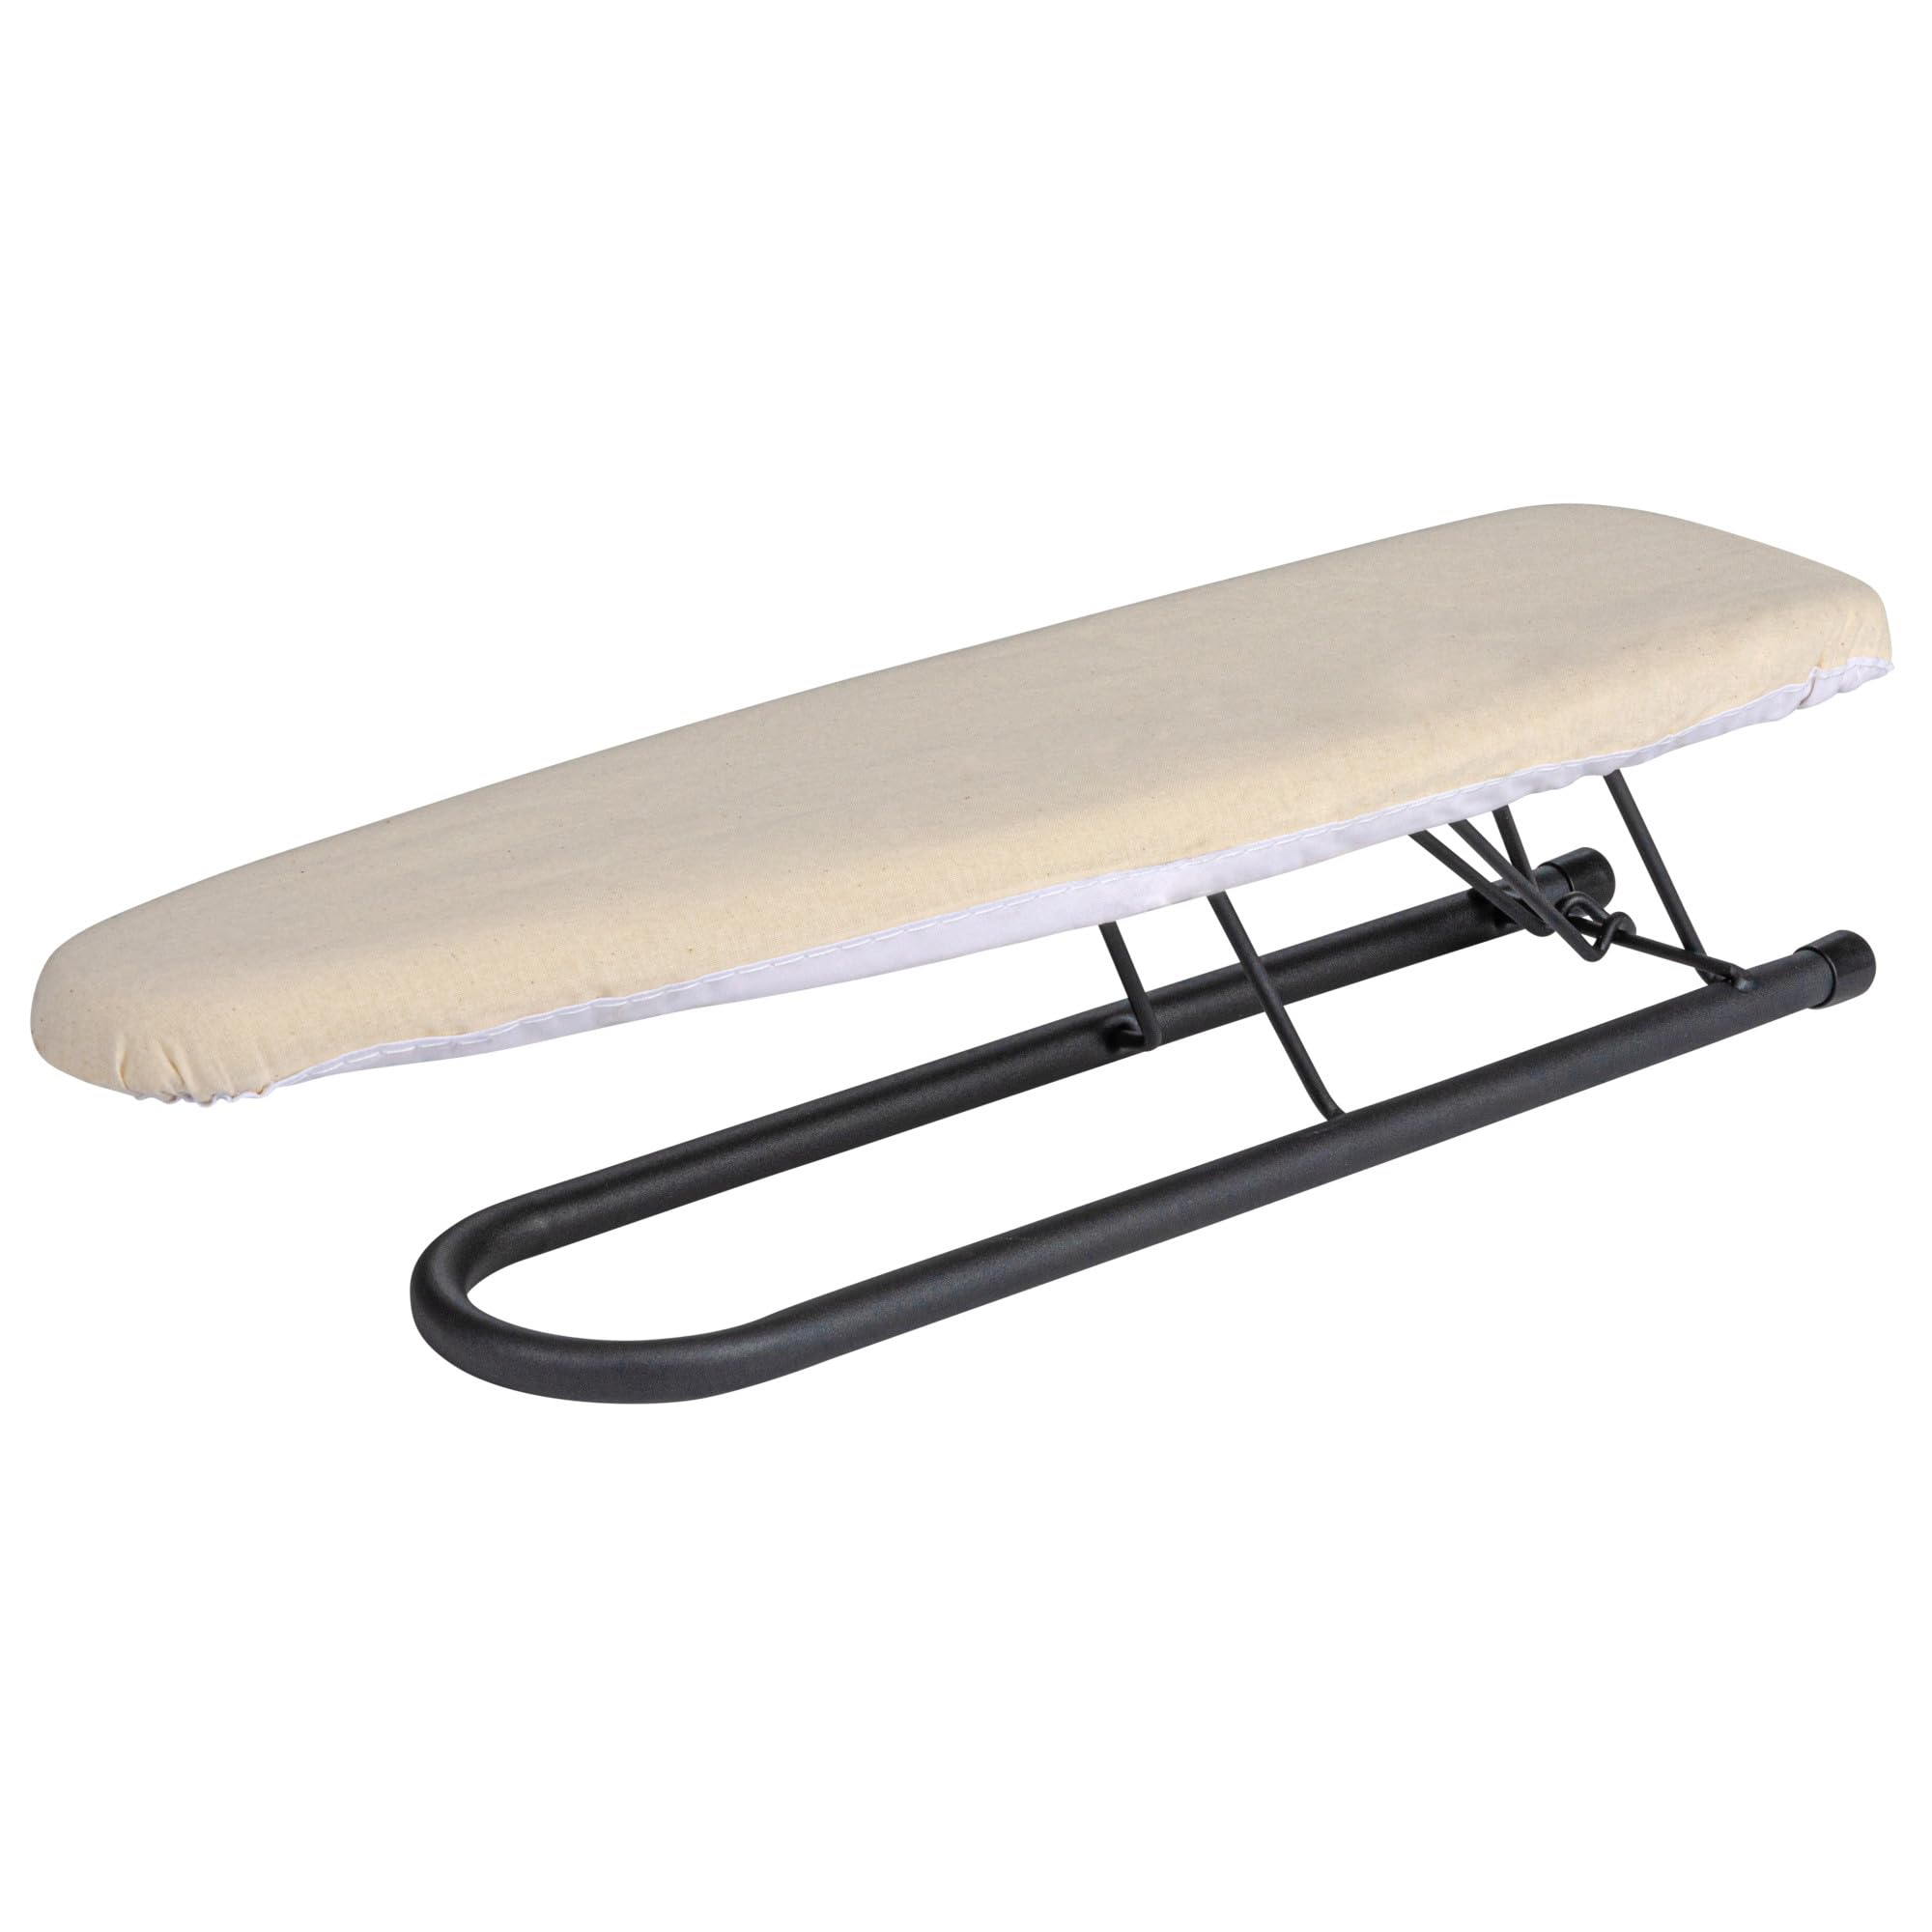 Household Essentials Accessory Sleeve Ironing Board, Plastic top, Foam Pad and Natural Cotton Cover, Heat-Resistant, Compact and Easy to Use, Matte Black Frame